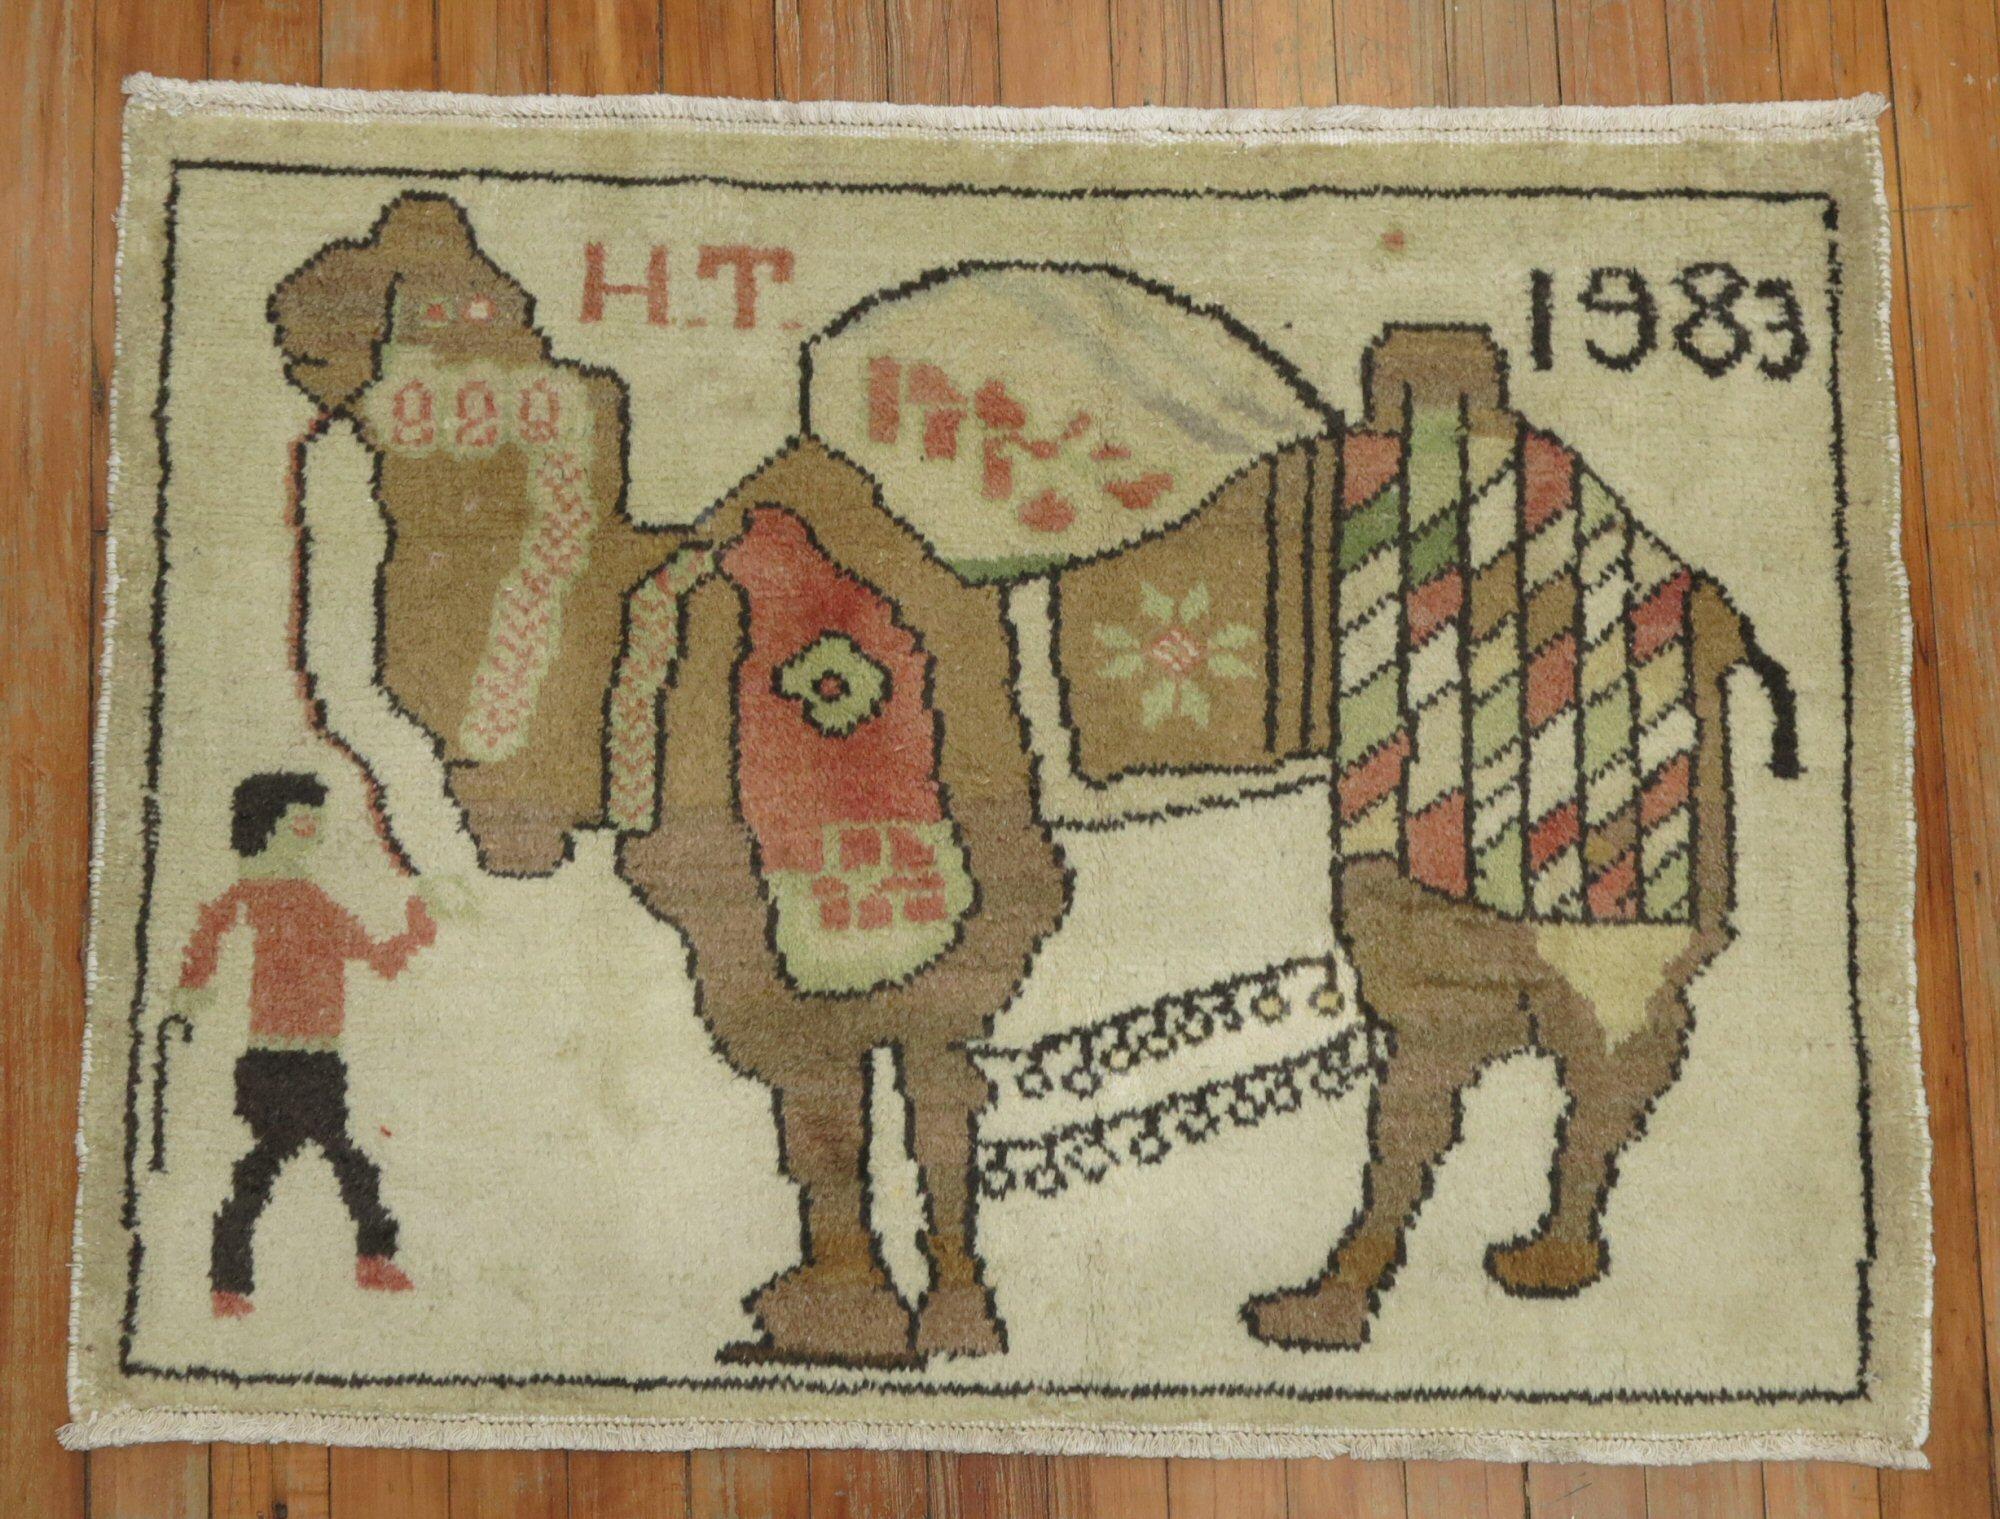 A cute small Turkish Pictorial Camel rug depicting a man pulling a large camel. Its also dated 1983

Measures: 2'2'' x 3'.